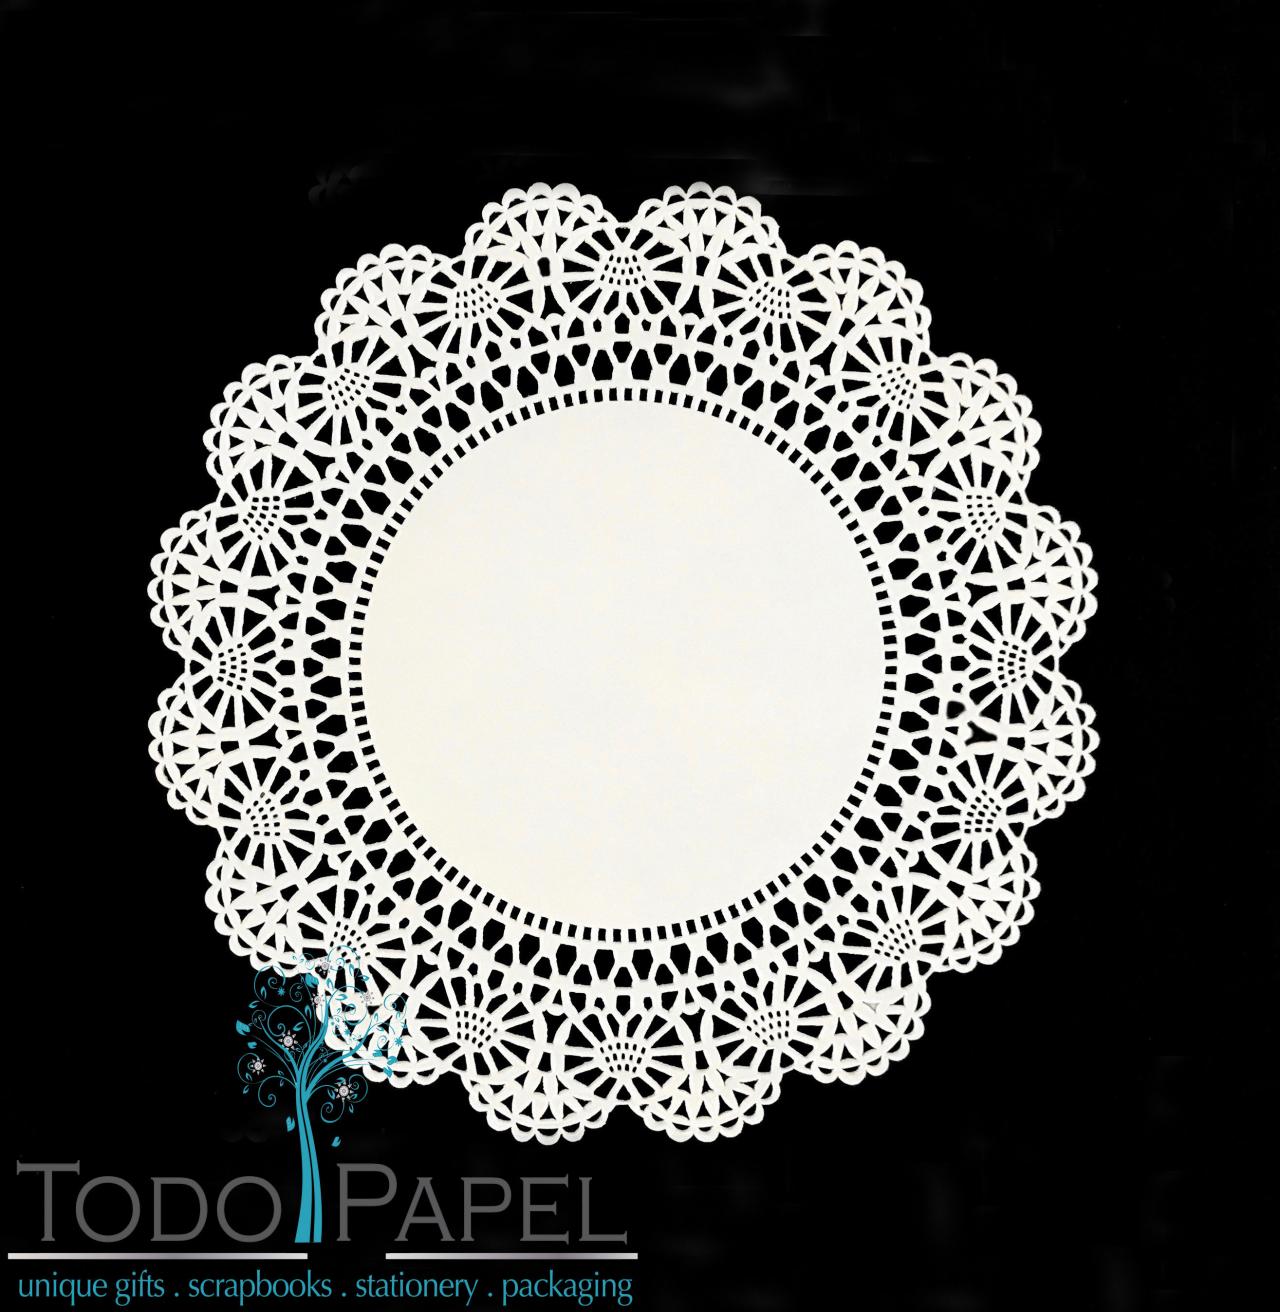 100 Pack - 12 Inch White Cambridge Style Paper Lace Doilies | The Exquisite Design Is Perfect For Wedding Charger Plates, Placemats, Centerpieces